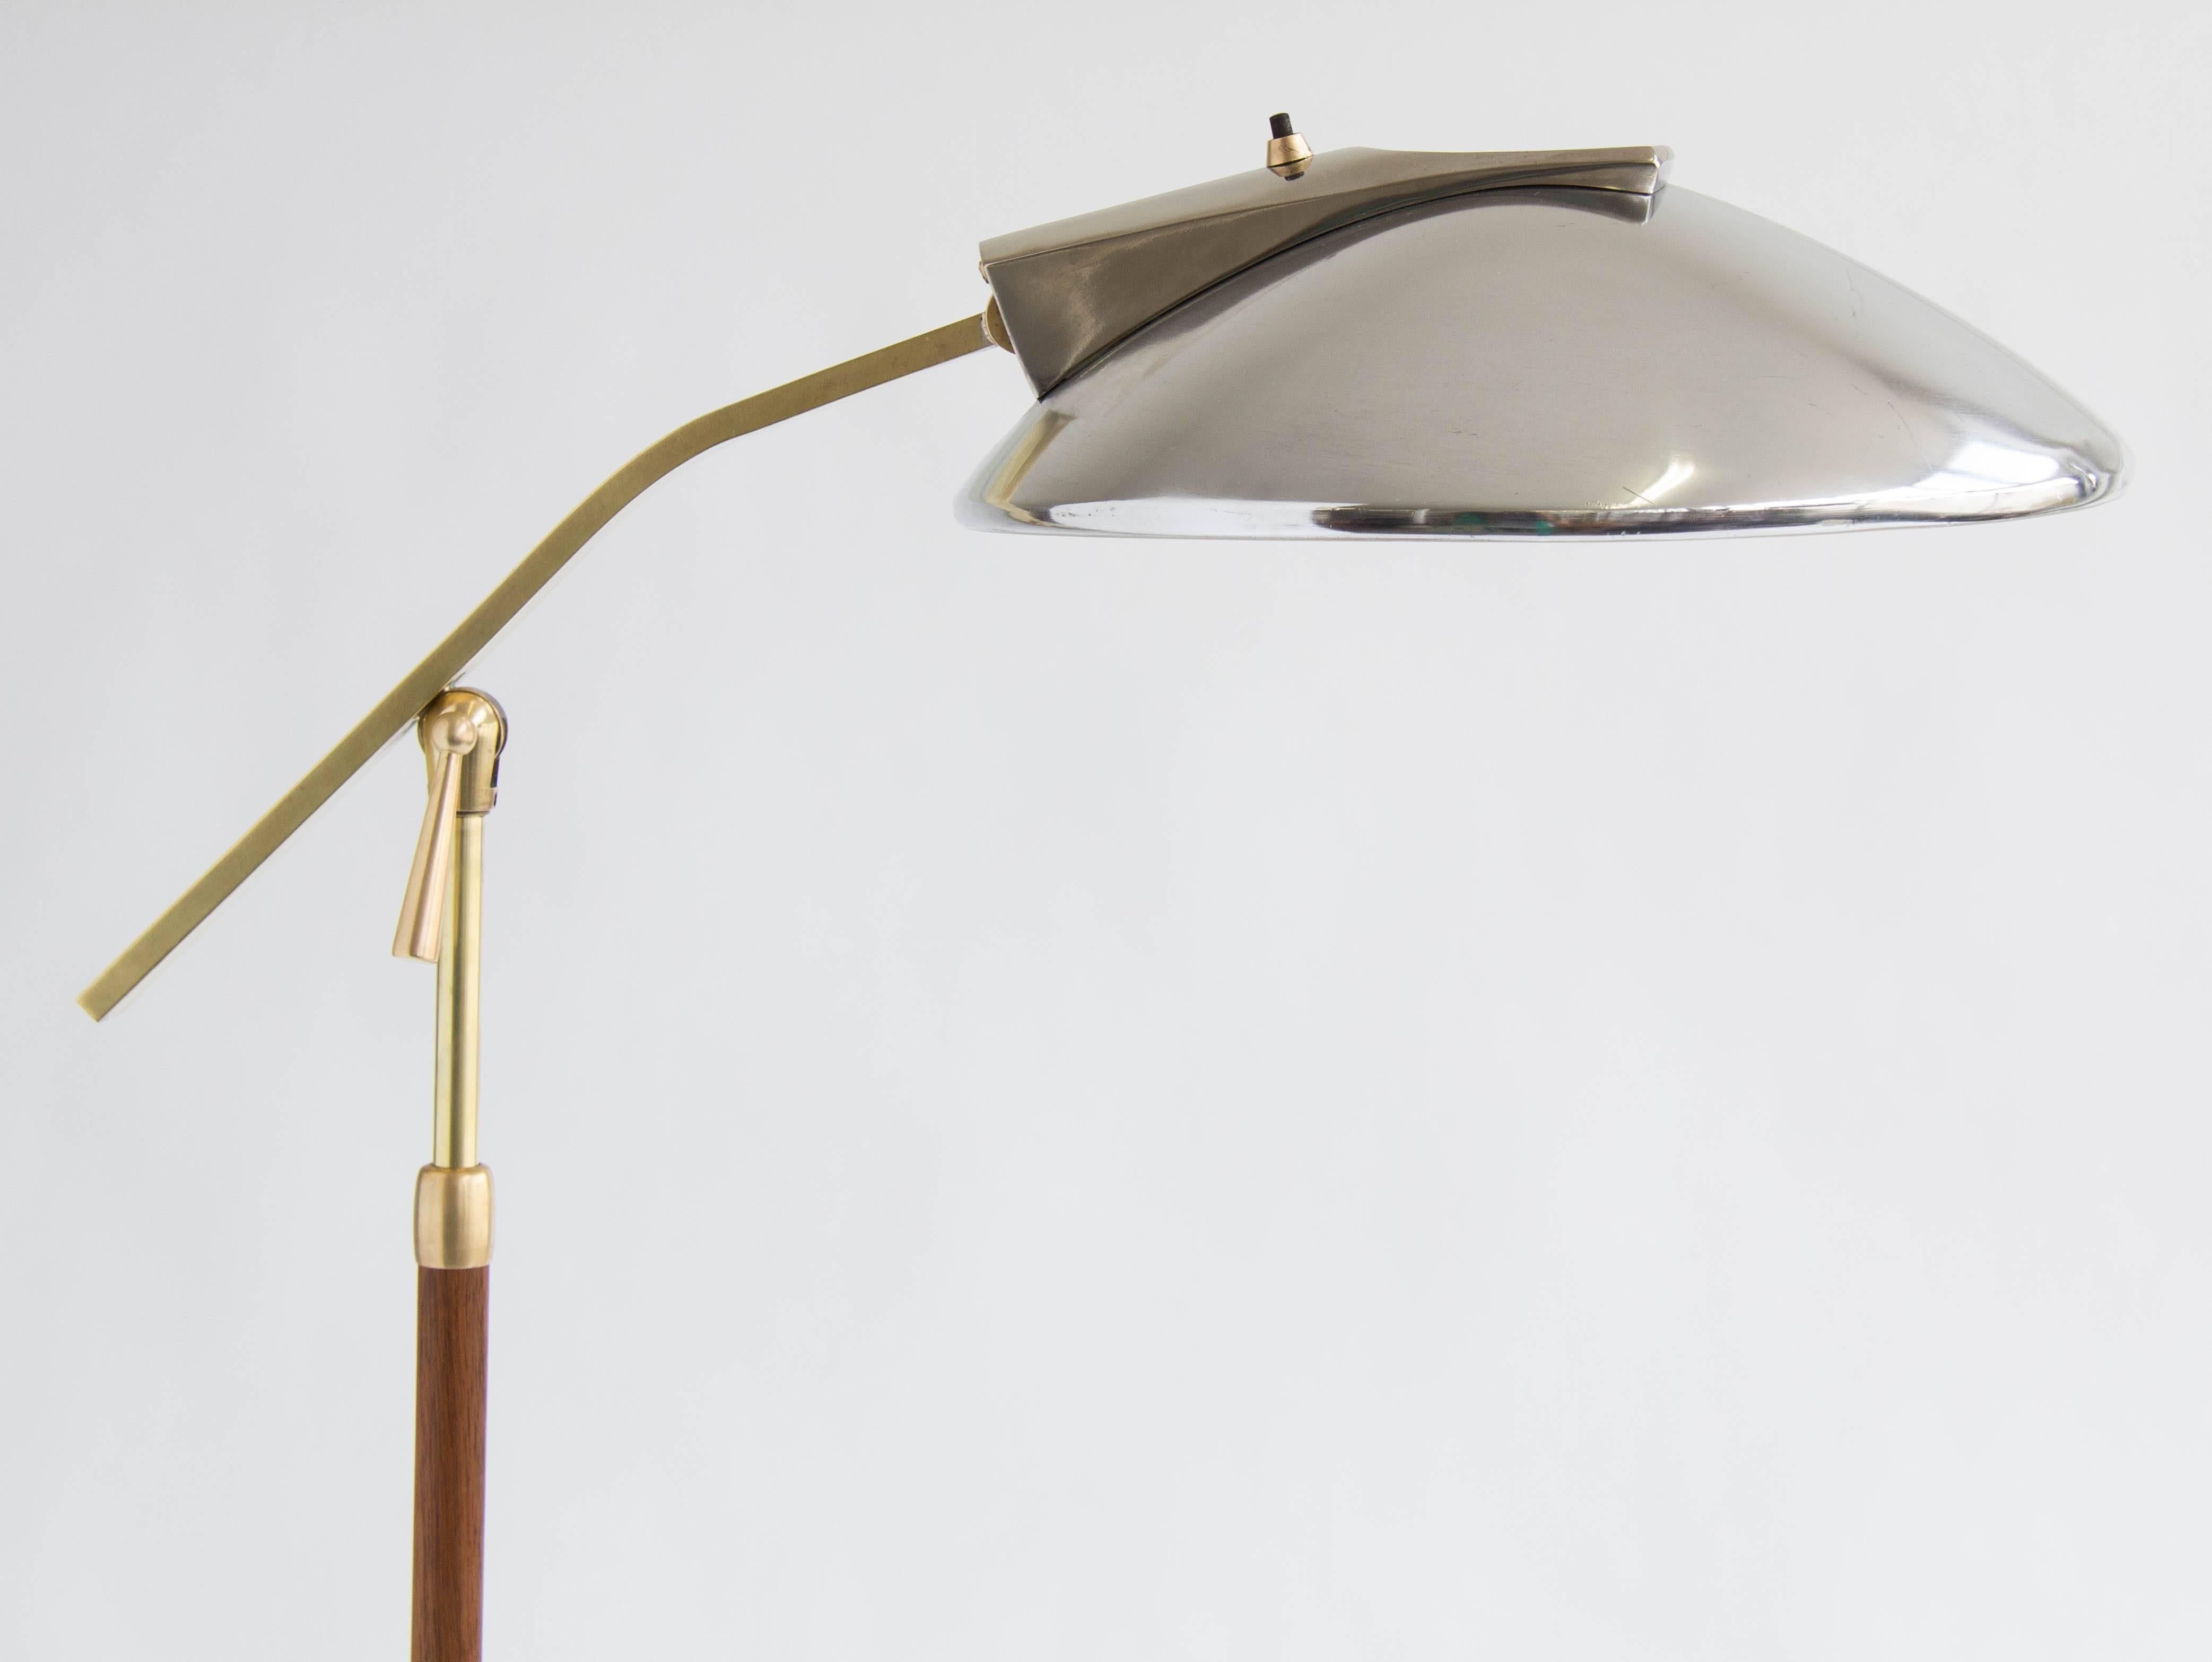 Rare floor lamp in ‘cobra’ style by Gerald Thurston for Laurel Lamp Co. in aluminum, brass, pewter and wood veneer. The lamp has a broad aluminum shade with a plastic grate diffuser. Both the shade and the bridge arm are adjustable. The bridge meets